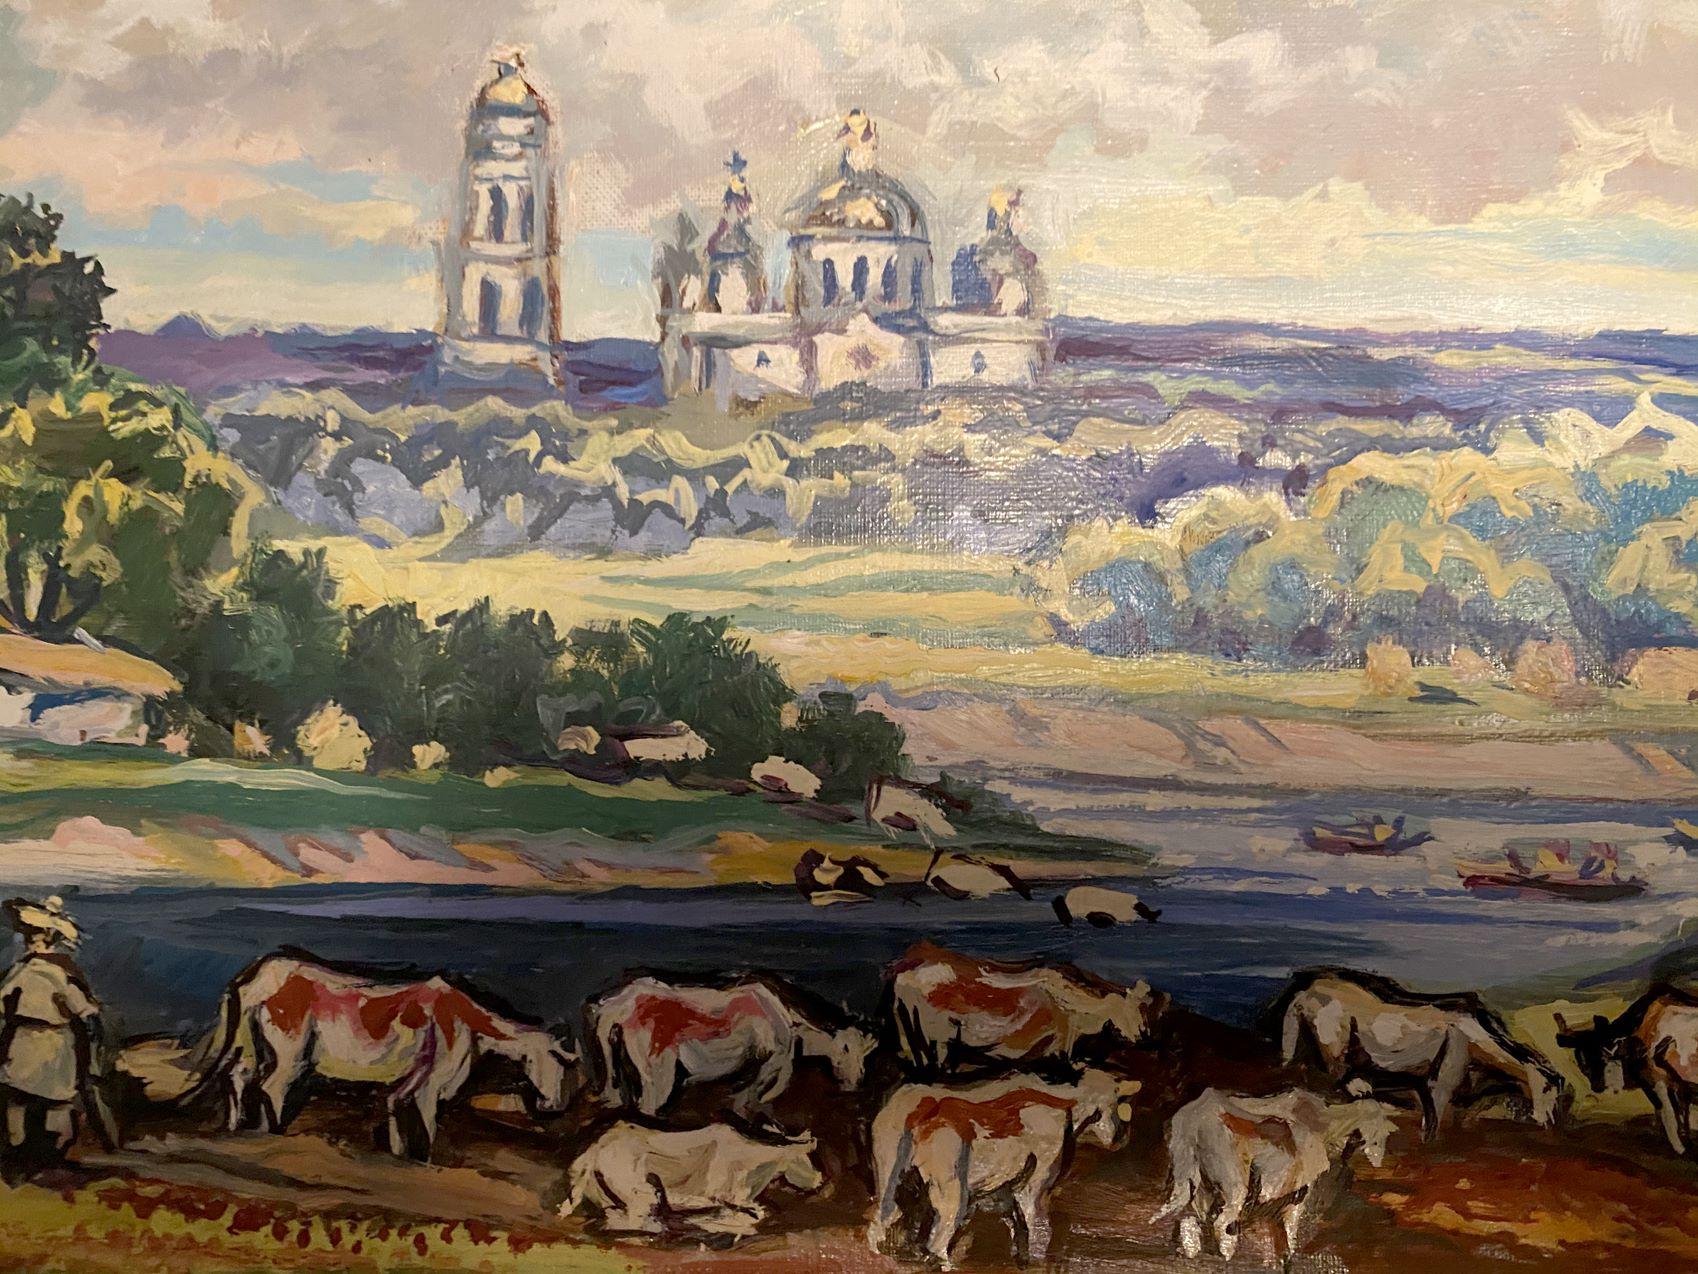 Artist: Alexander Litvinov
Work: Original oil painting, handmade artwork, one of a kind 
Medium: Oil on Canvas
Style: Classic Figurative
Year: 2003
Title: Native places
Size: 8.5